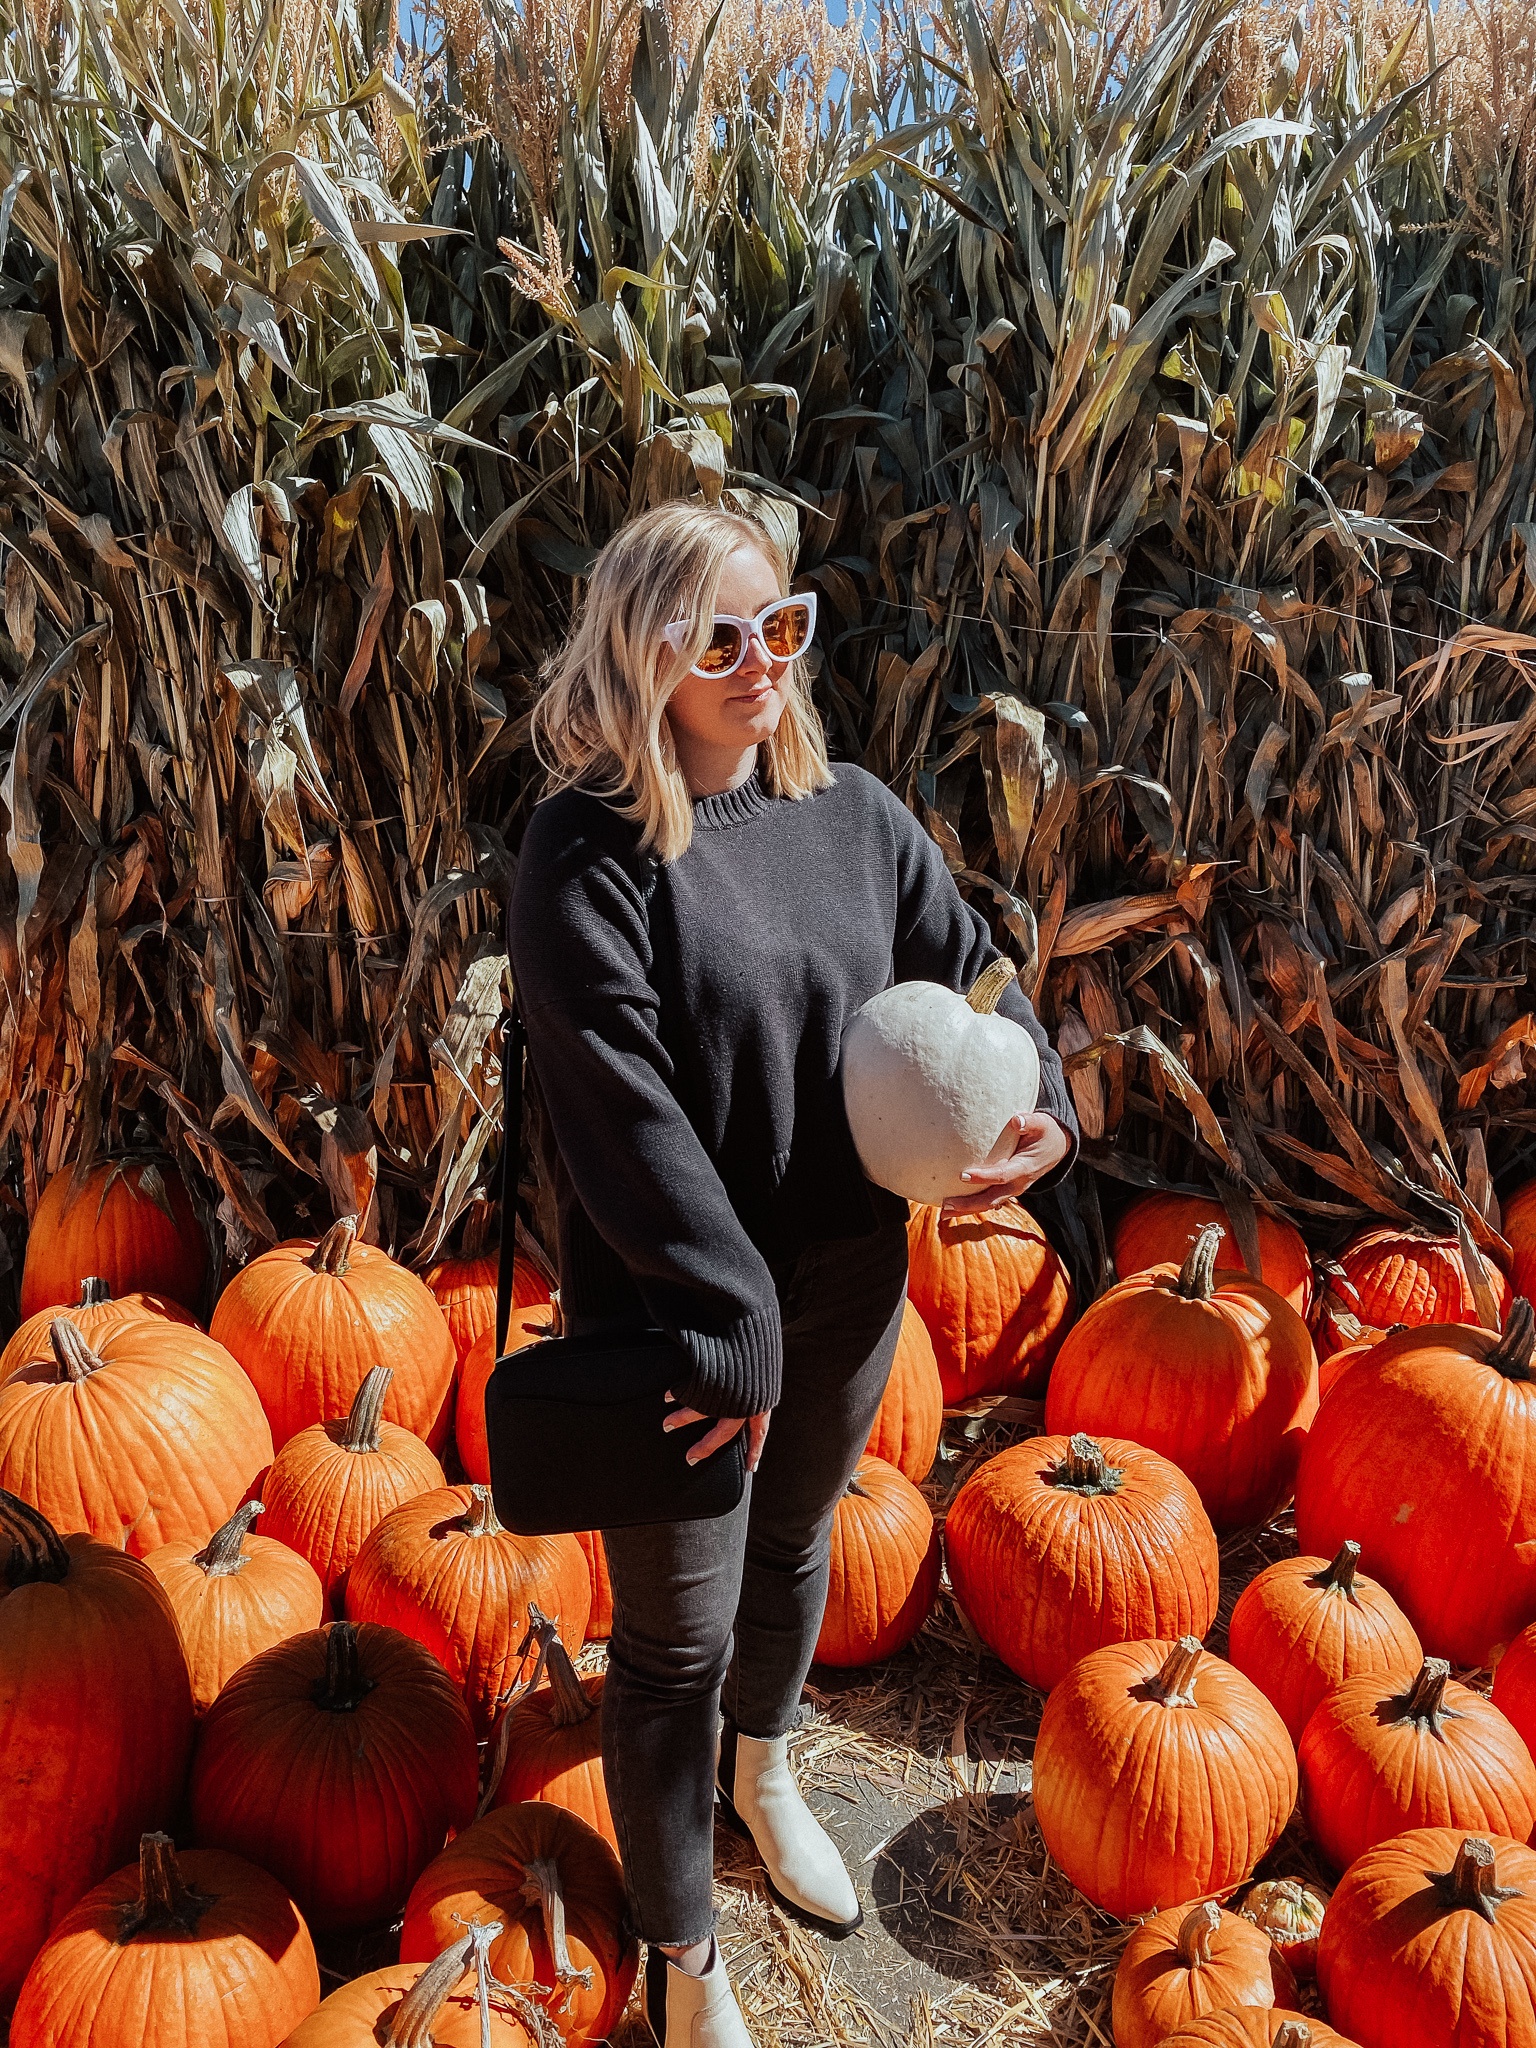 It's pumpkin patch season! Plan the perfect visit to a pumpkin patch near you with these easy tips and tricks!